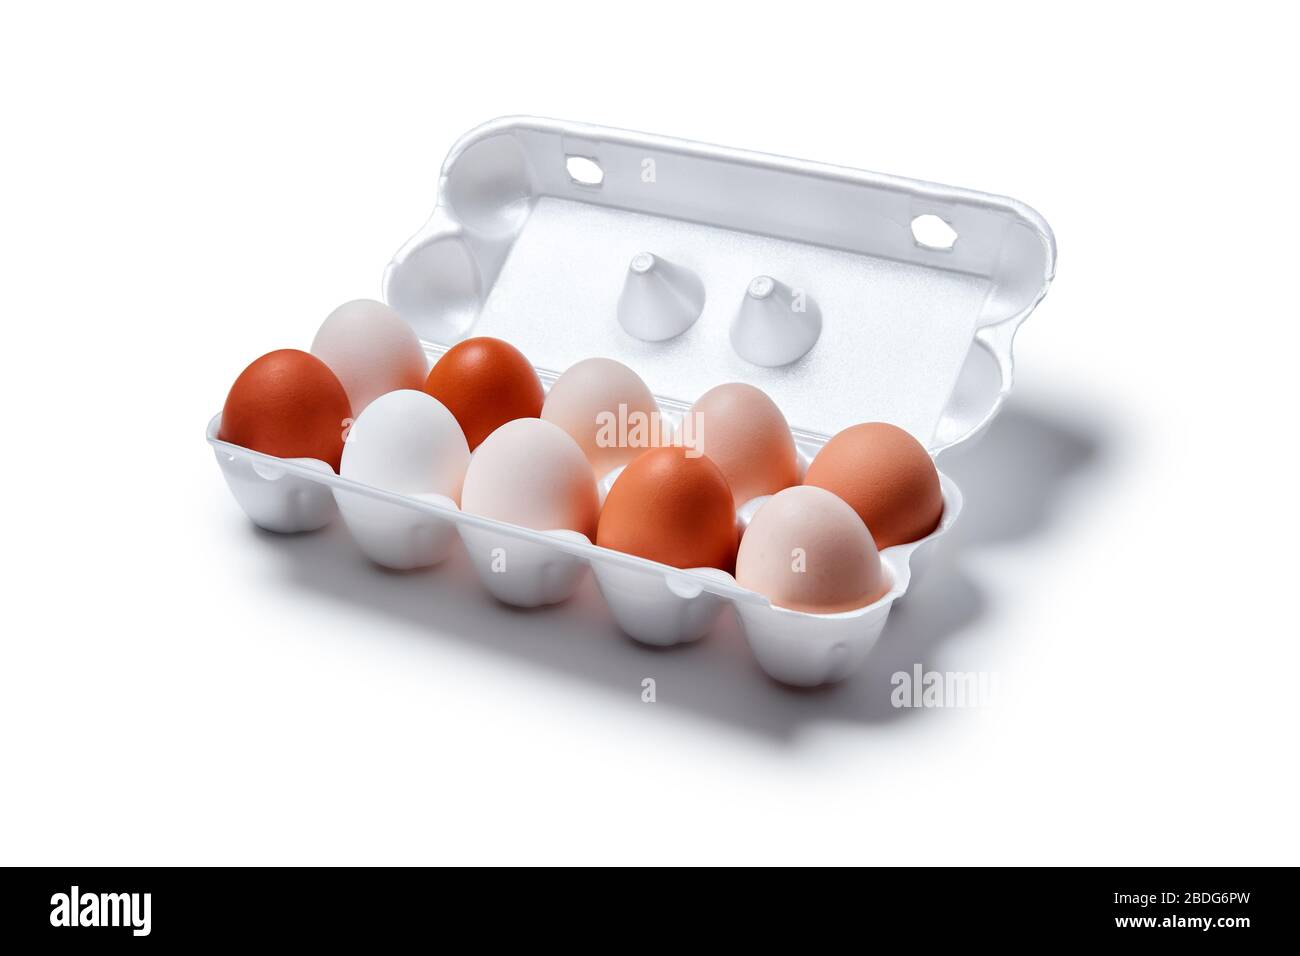 eggs of different shades from white to brown are packed together in one egg crate, isolated on a white background Stock Photo